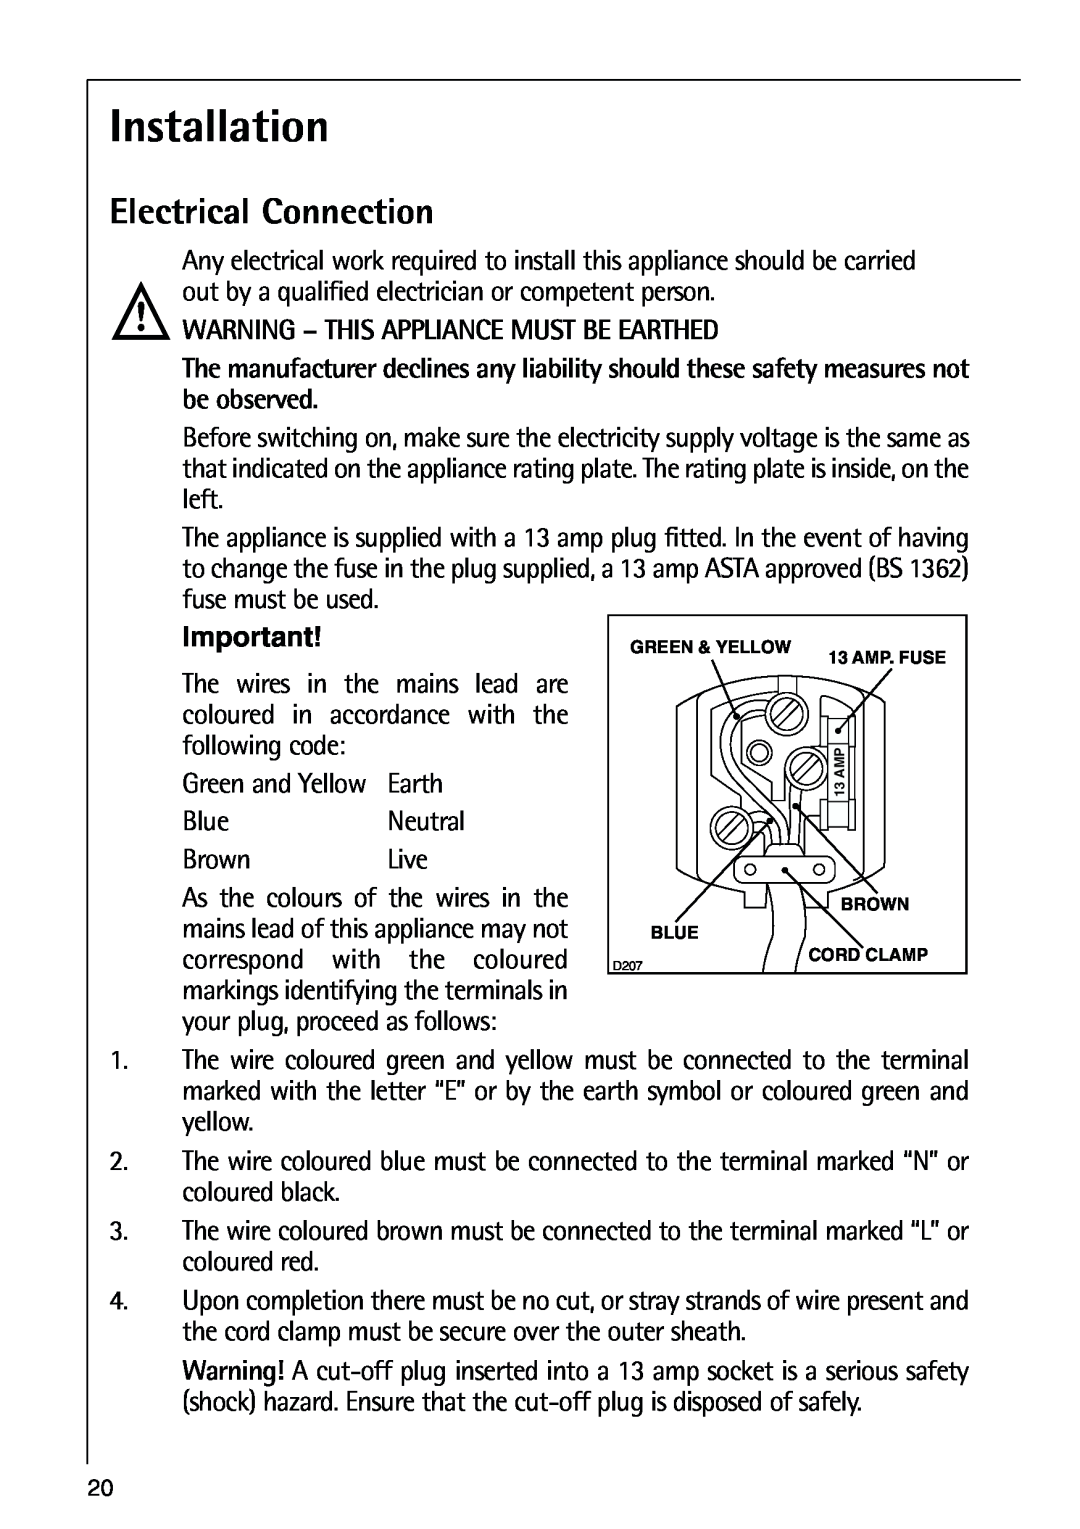 Electrolux 75270 GA user manual Installation, Electrical Connection, Warning - This Appliance Must Be Earthed 